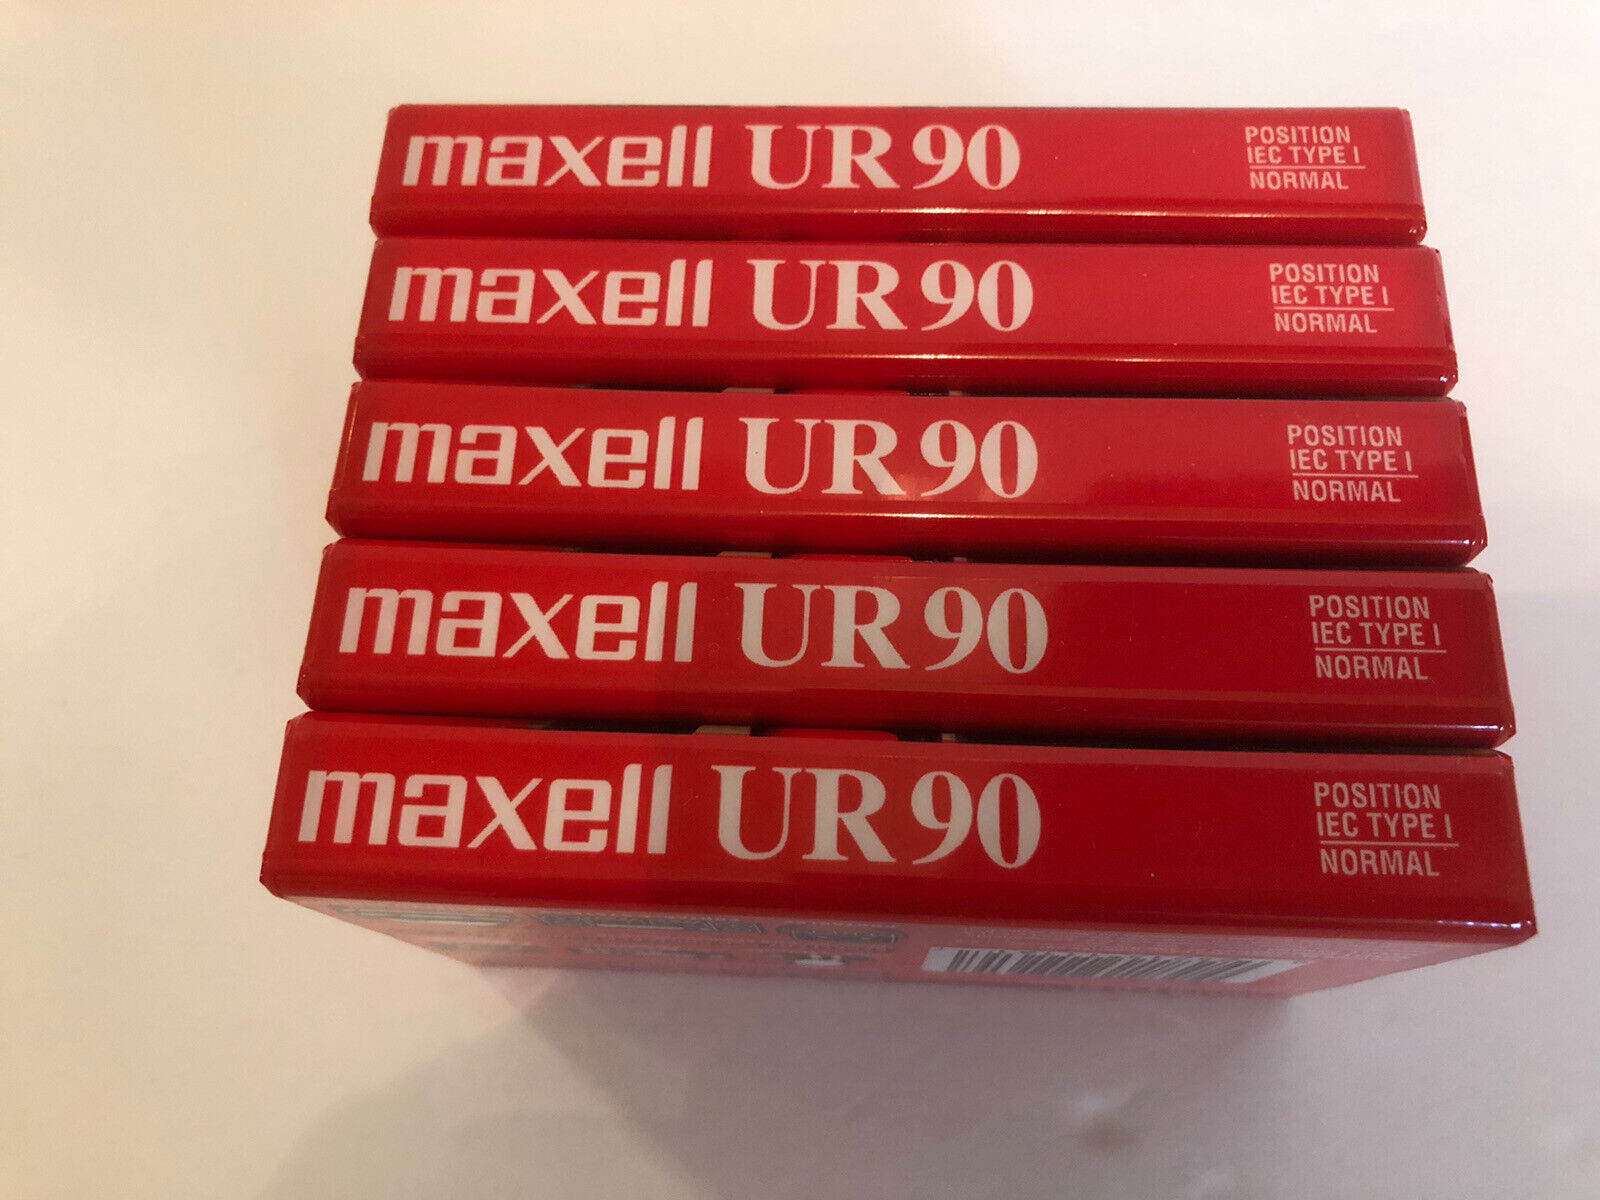 NEW 5 Pack Be super welcome Sealed Maxell Blank Limited price Normal Bi Cassette 1 Type Tapes